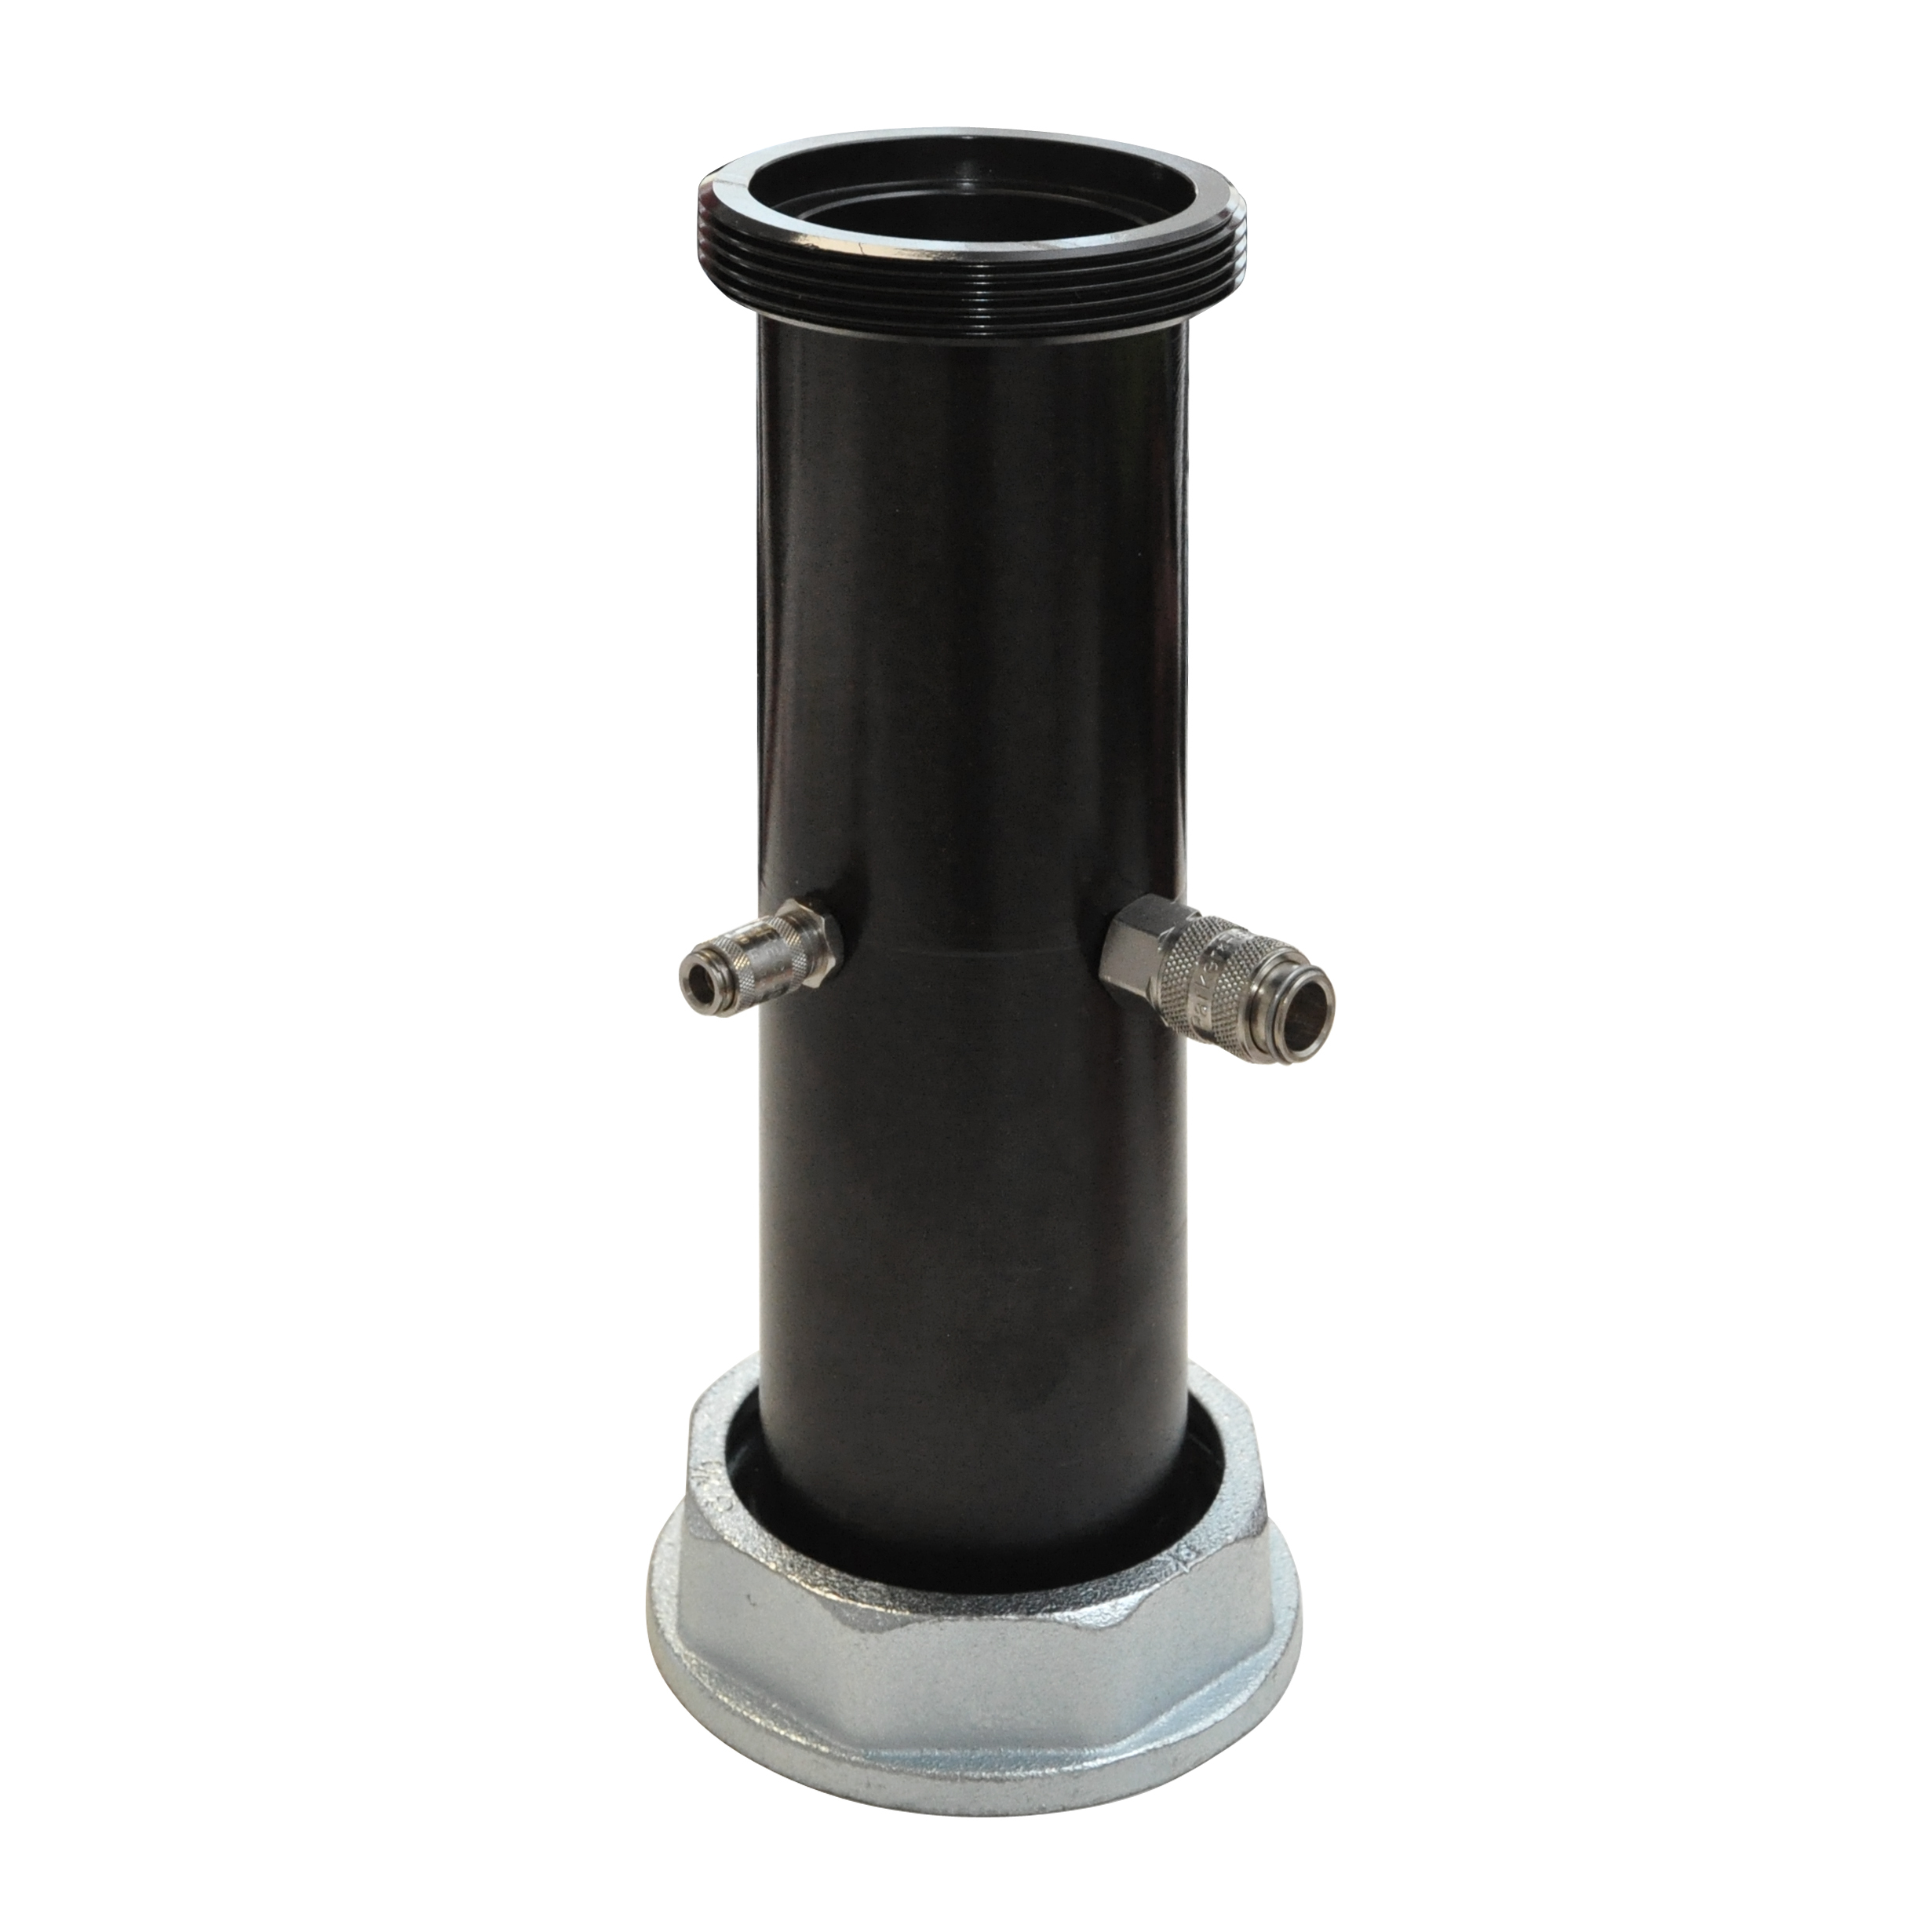 Adaptor extension 2 1/2 inch ET to coupling series 20 and 21